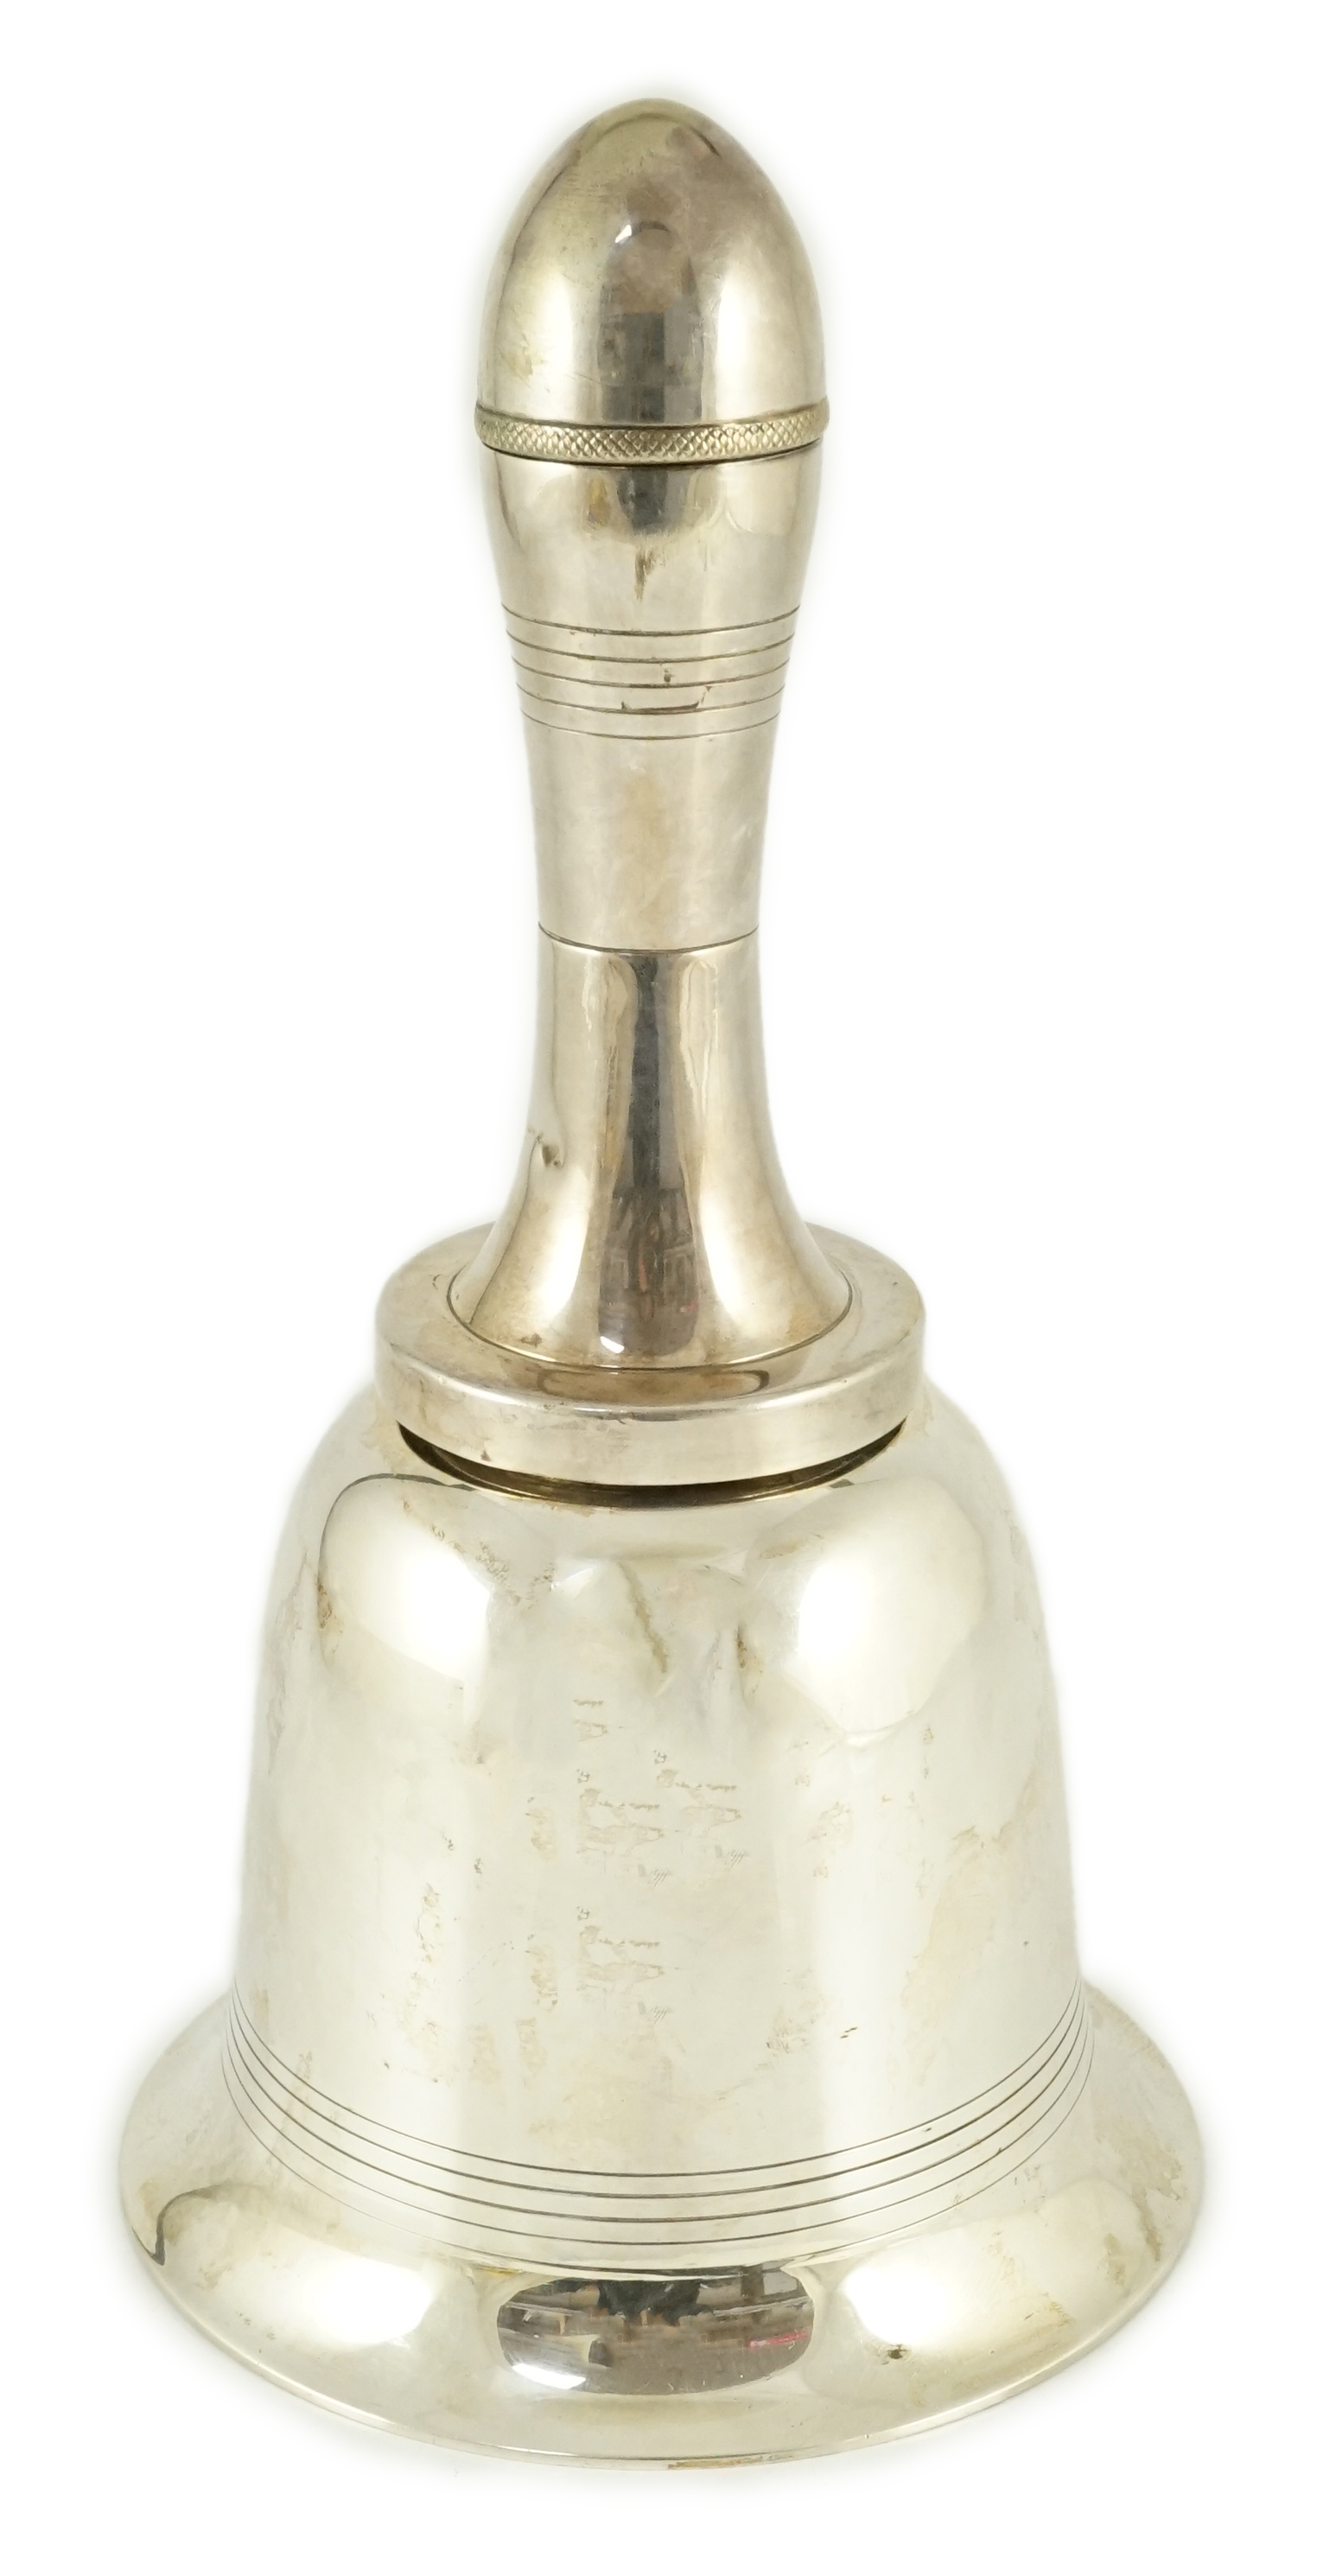 An Asprey & Co silver plated novelty 'Bell' cocktail shaker, circa 1930